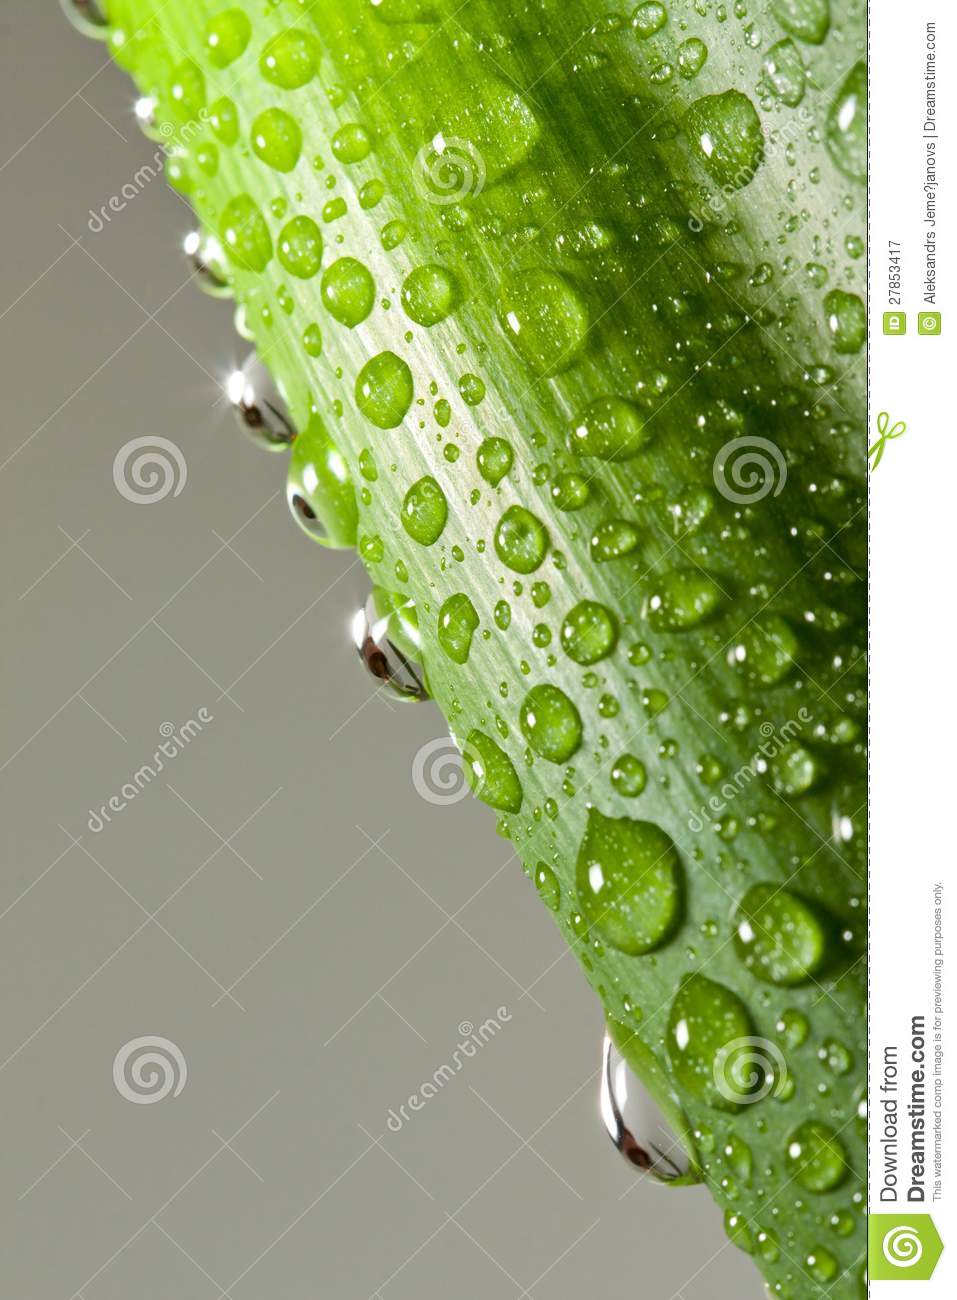 Photography of Water Drops On Plants